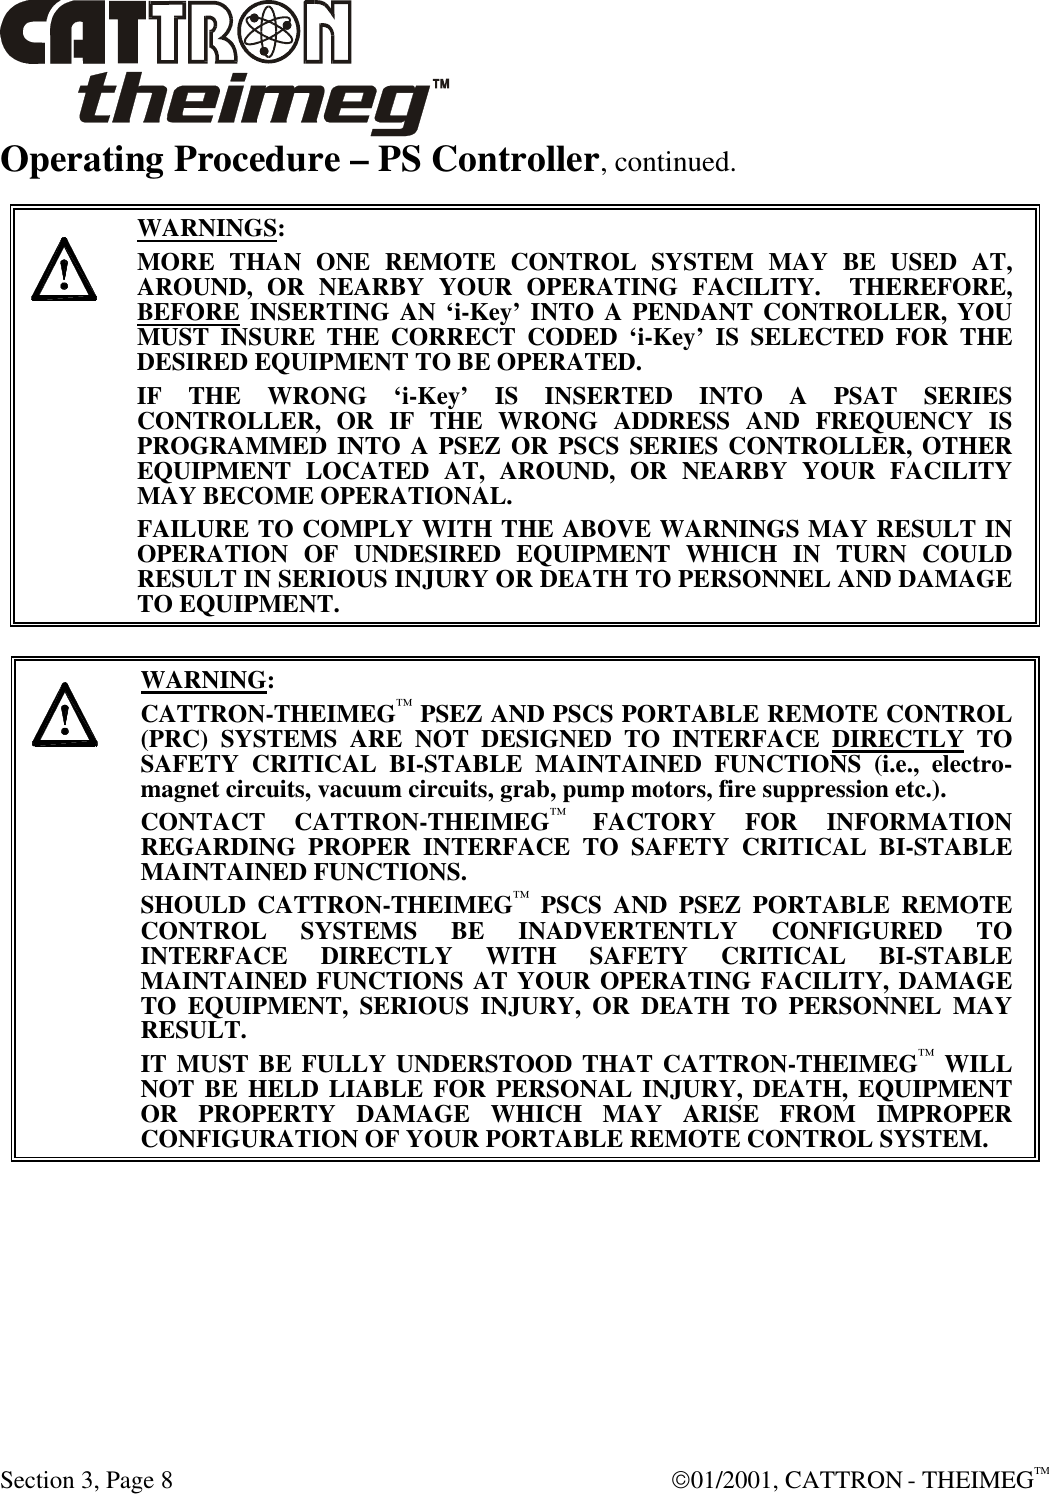  Section 3, Page 8  01/2001, CATTRON - THEIMEGTM Operating Procedure – PS Controller, continued.     WARNINGS: MORE THAN ONE REMOTE CONTROL SYSTEM MAY BE USED AT, AROUND, OR NEARBY YOUR OPERATING FACILITY.  THEREFORE, BEFORE INSERTING AN ‘i-Key’ INTO A PENDANT CONTROLLER, YOU MUST INSURE THE CORRECT CODED ‘i-Key’ IS SELECTED FOR THE DESIRED EQUIPMENT TO BE OPERATED. IF THE WRONG ‘i-Key’ IS INSERTED INTO A PSAT SERIES CONTROLLER, OR IF THE WRONG ADDRESS AND FREQUENCY IS PROGRAMMED INTO A PSEZ OR PSCS SERIES CONTROLLER, OTHER EQUIPMENT LOCATED AT, AROUND, OR NEARBY YOUR FACILITY MAY BECOME OPERATIONAL. FAILURE TO COMPLY WITH THE ABOVE WARNINGS MAY RESULT IN OPERATION OF UNDESIRED EQUIPMENT WHICH IN TURN COULD RESULT IN SERIOUS INJURY OR DEATH TO PERSONNEL AND DAMAGE TO EQUIPMENT.       WARNING: CATTRON-THEIMEG™ PSEZ AND PSCS PORTABLE REMOTE CONTROL (PRC) SYSTEMS ARE NOT DESIGNED TO INTERFACE DIRECTLY TO SAFETY CRITICAL BI-STABLE MAINTAINED FUNCTIONS (i.e., electro-magnet circuits, vacuum circuits, grab, pump motors, fire suppression etc.).   CONTACT CATTRON-THEIMEG™ FACTORY FOR INFORMATION REGARDING PROPER INTERFACE TO SAFETY CRITICAL BI-STABLE MAINTAINED FUNCTIONS.   SHOULD CATTRON-THEIMEG™ PSCS AND PSEZ PORTABLE REMOTE CONTROL SYSTEMS BE INADVERTENTLY CONFIGURED TO INTERFACE DIRECTLY WITH SAFETY CRITICAL BI-STABLE MAINTAINED FUNCTIONS AT YOUR OPERATING FACILITY, DAMAGE TO EQUIPMENT, SERIOUS INJURY, OR DEATH TO PERSONNEL MAY RESULT.   IT MUST BE FULLY UNDERSTOOD THAT CATTRON-THEIMEG™ WILL NOT BE HELD LIABLE FOR PERSONAL INJURY, DEATH, EQUIPMENT OR PROPERTY DAMAGE WHICH MAY ARISE FROM IMPROPER CONFIGURATION OF YOUR PORTABLE REMOTE CONTROL SYSTEM.  